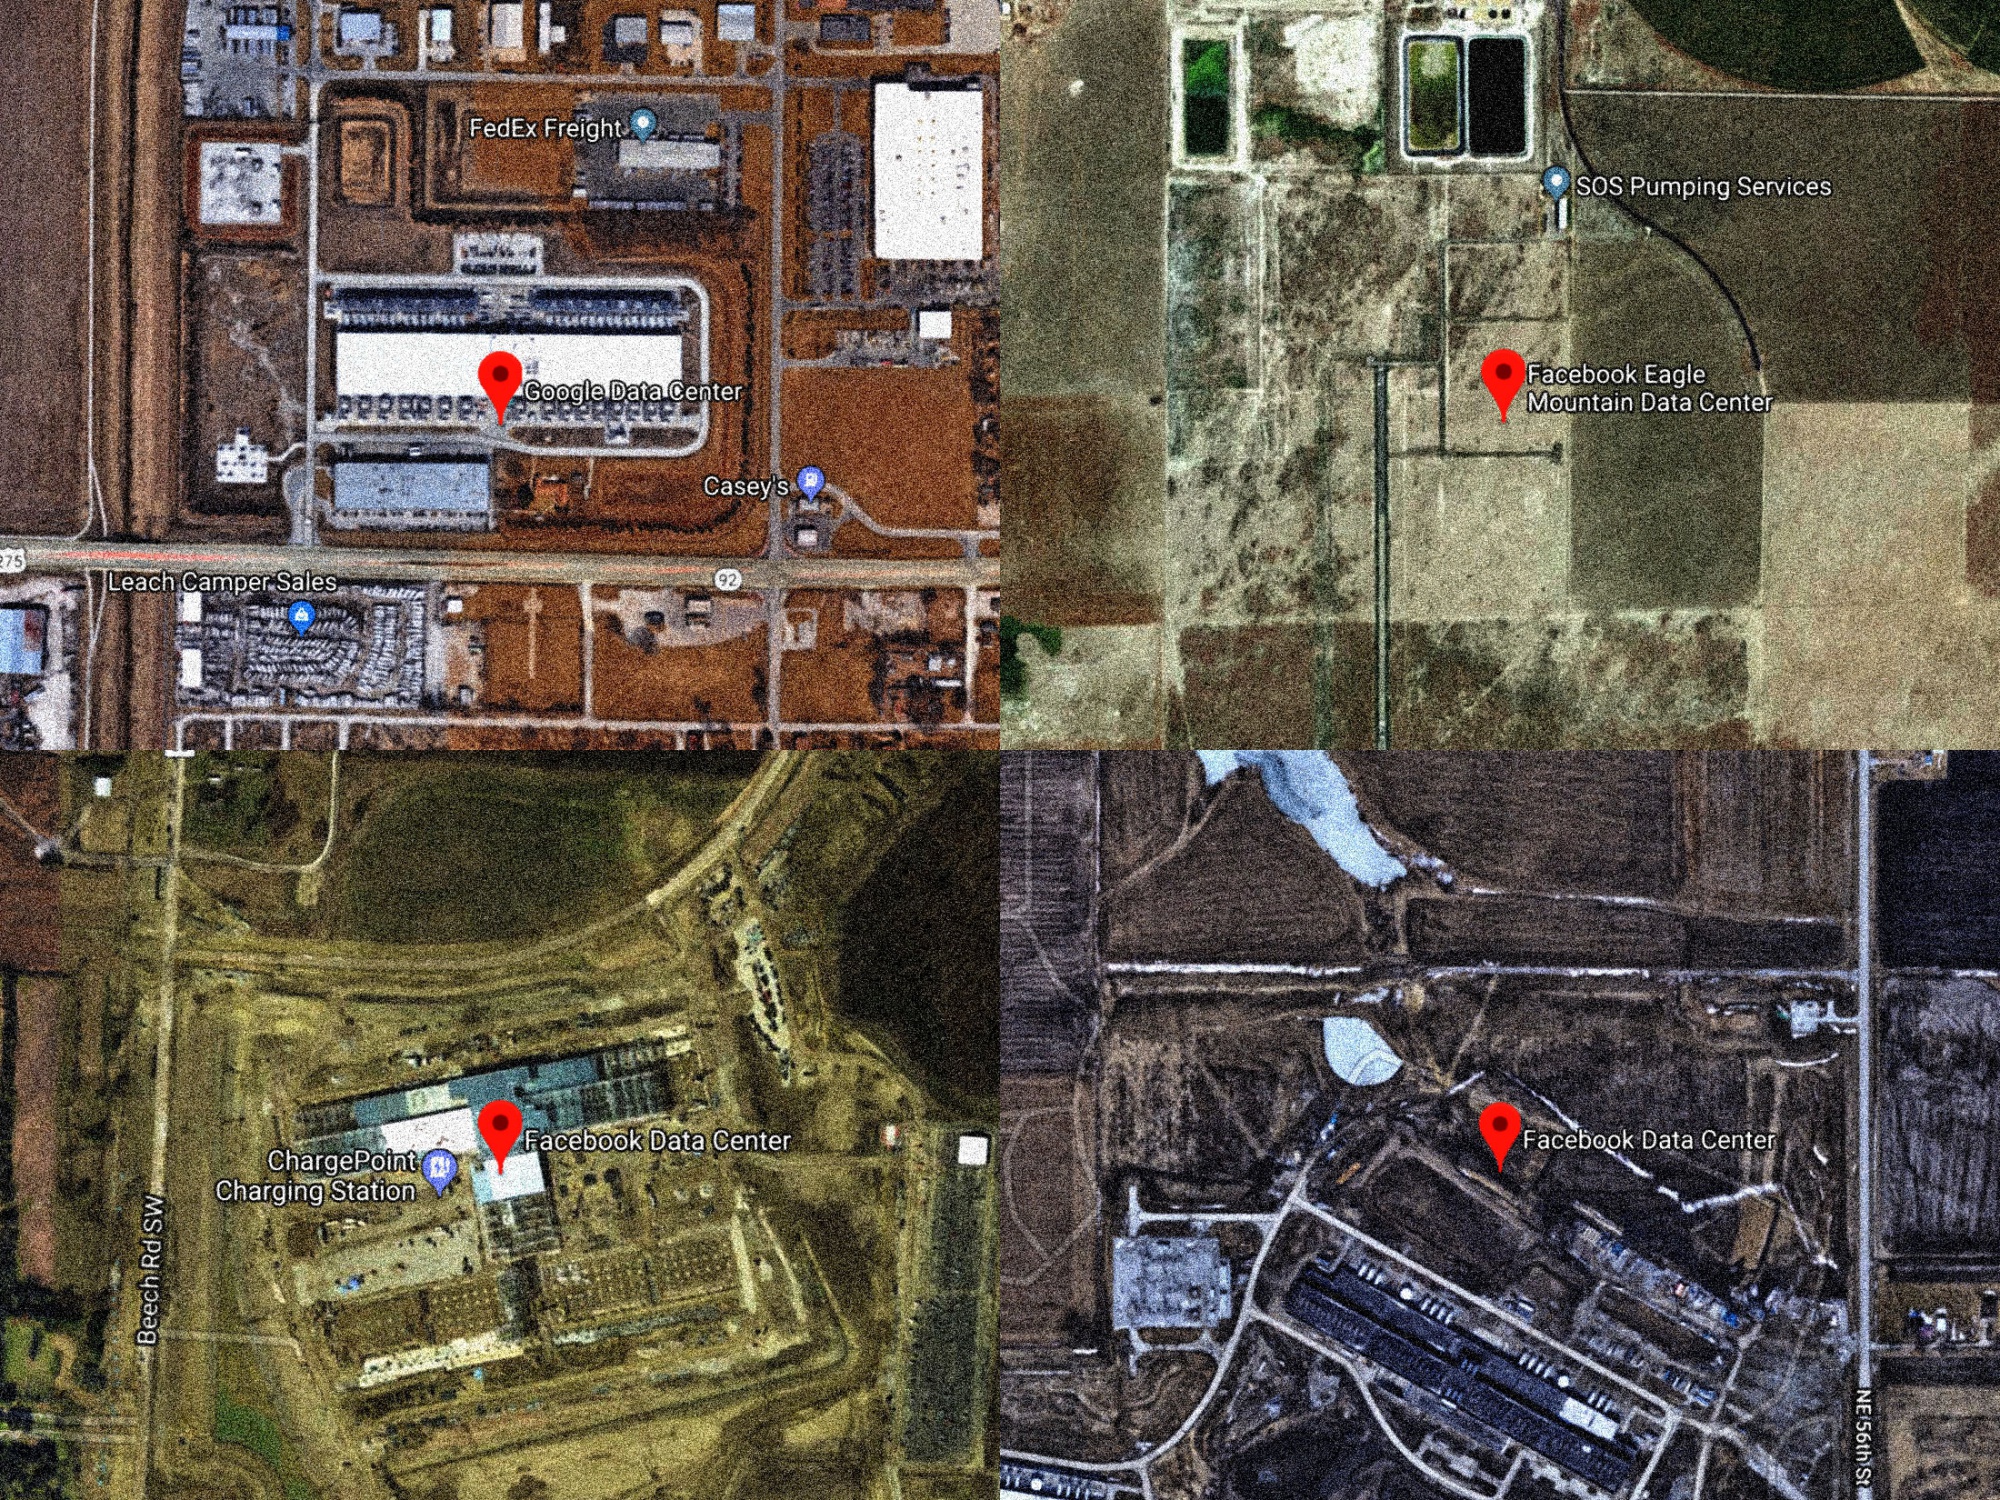 (Clockwise, from top left) Satellite images showing data centers in Council Bluffs, Iowa; Eagle Mountain, Utah; Altoona, Iowa; and New Albany, Ohio.